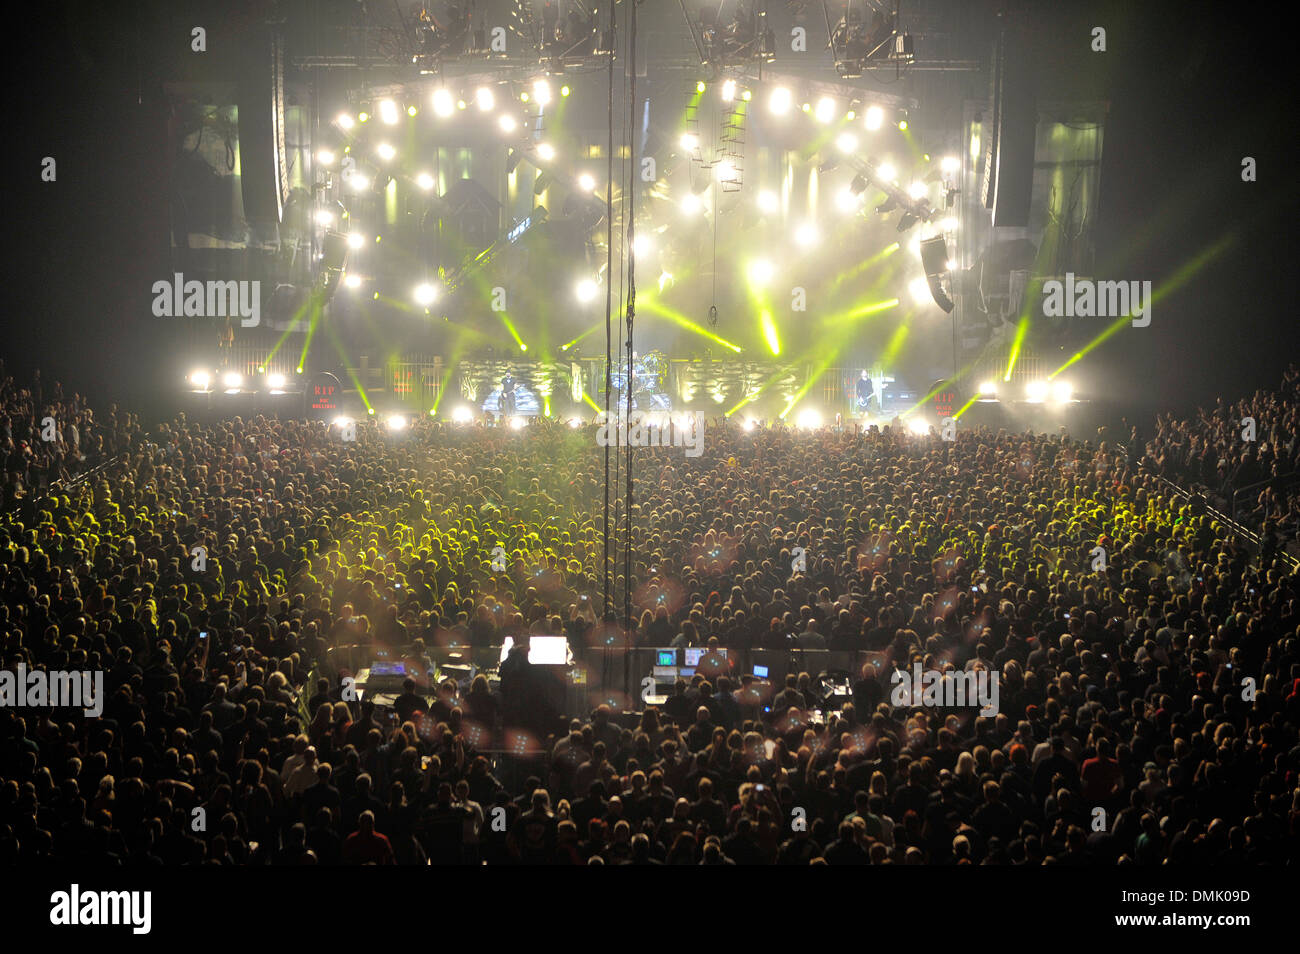 View of the stage and crowd at the O2 Word Arena in Berlin, Germany during a concert by Danish rock band VOLBEAT. Stock Photo